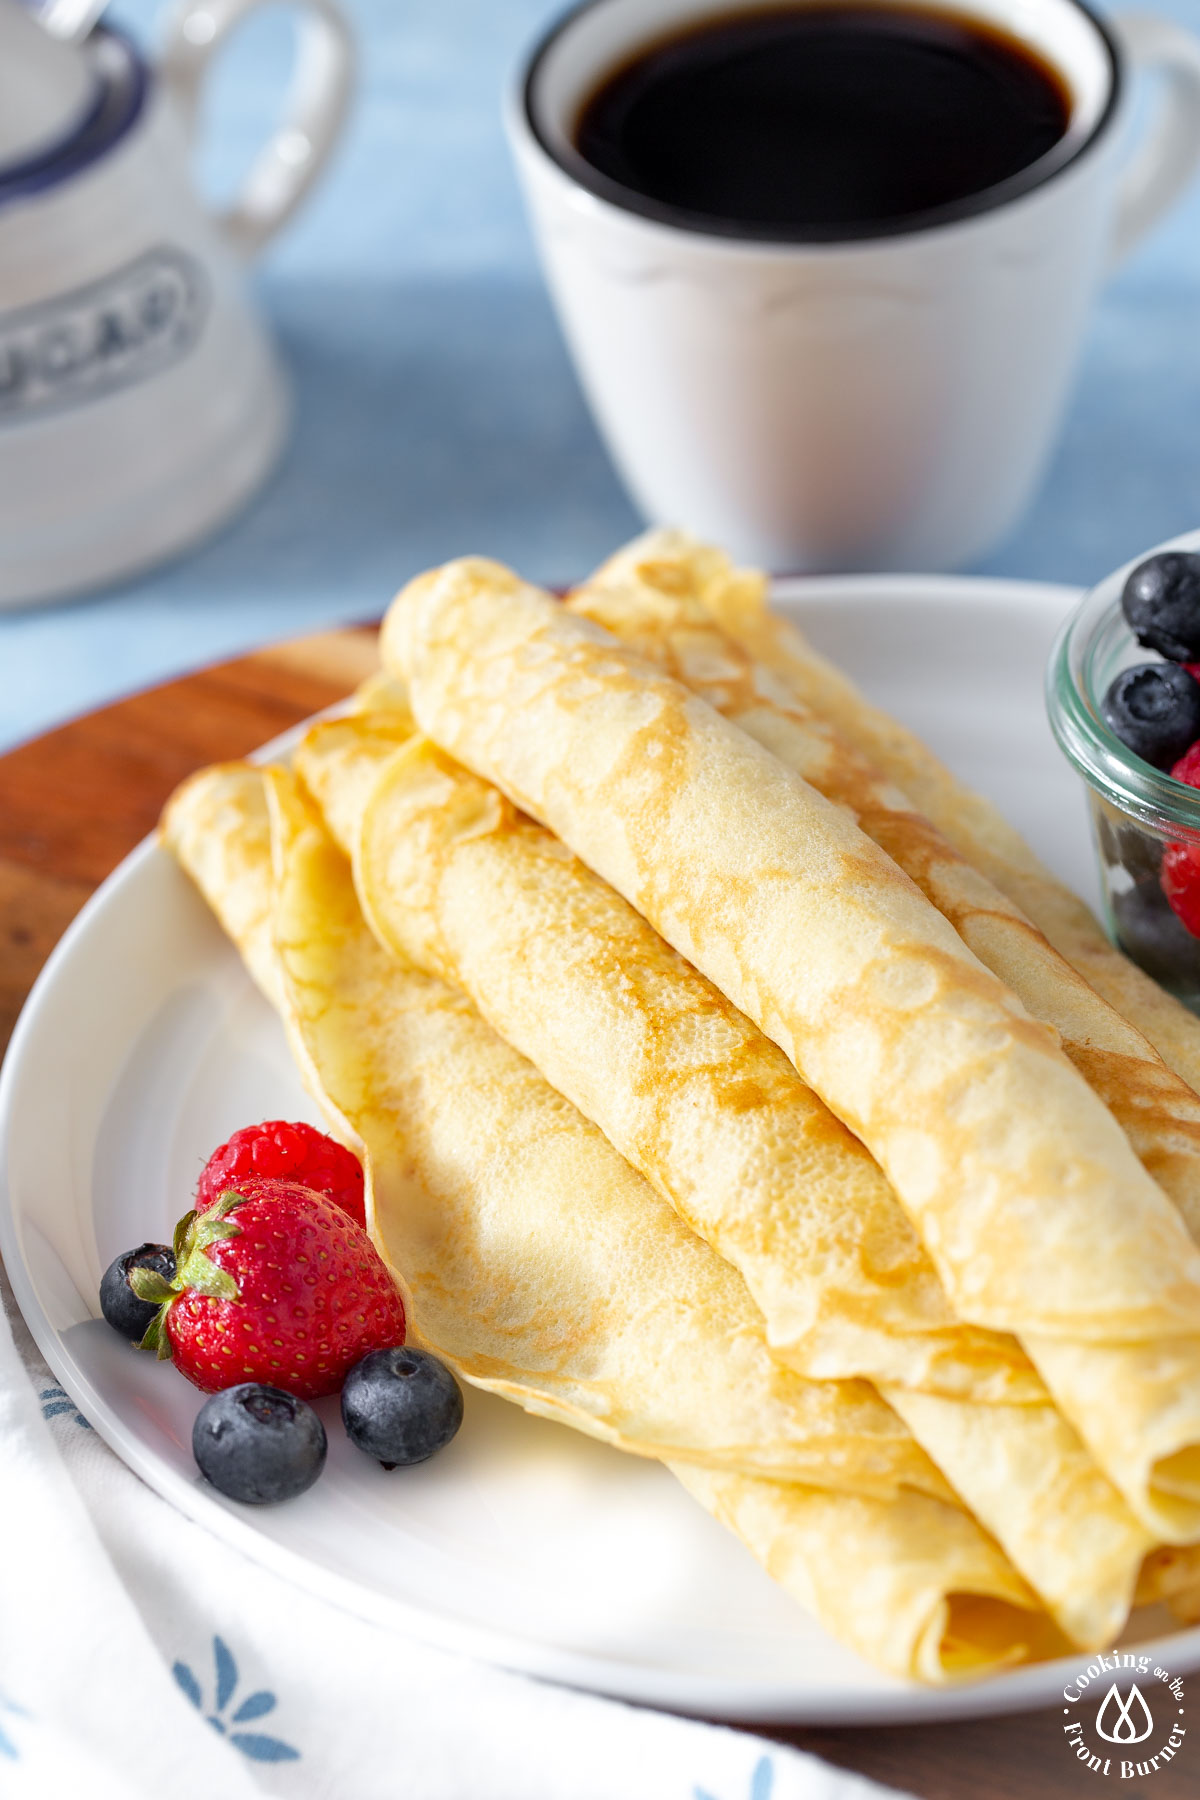 rolled crepes on a white plate with a side of berries